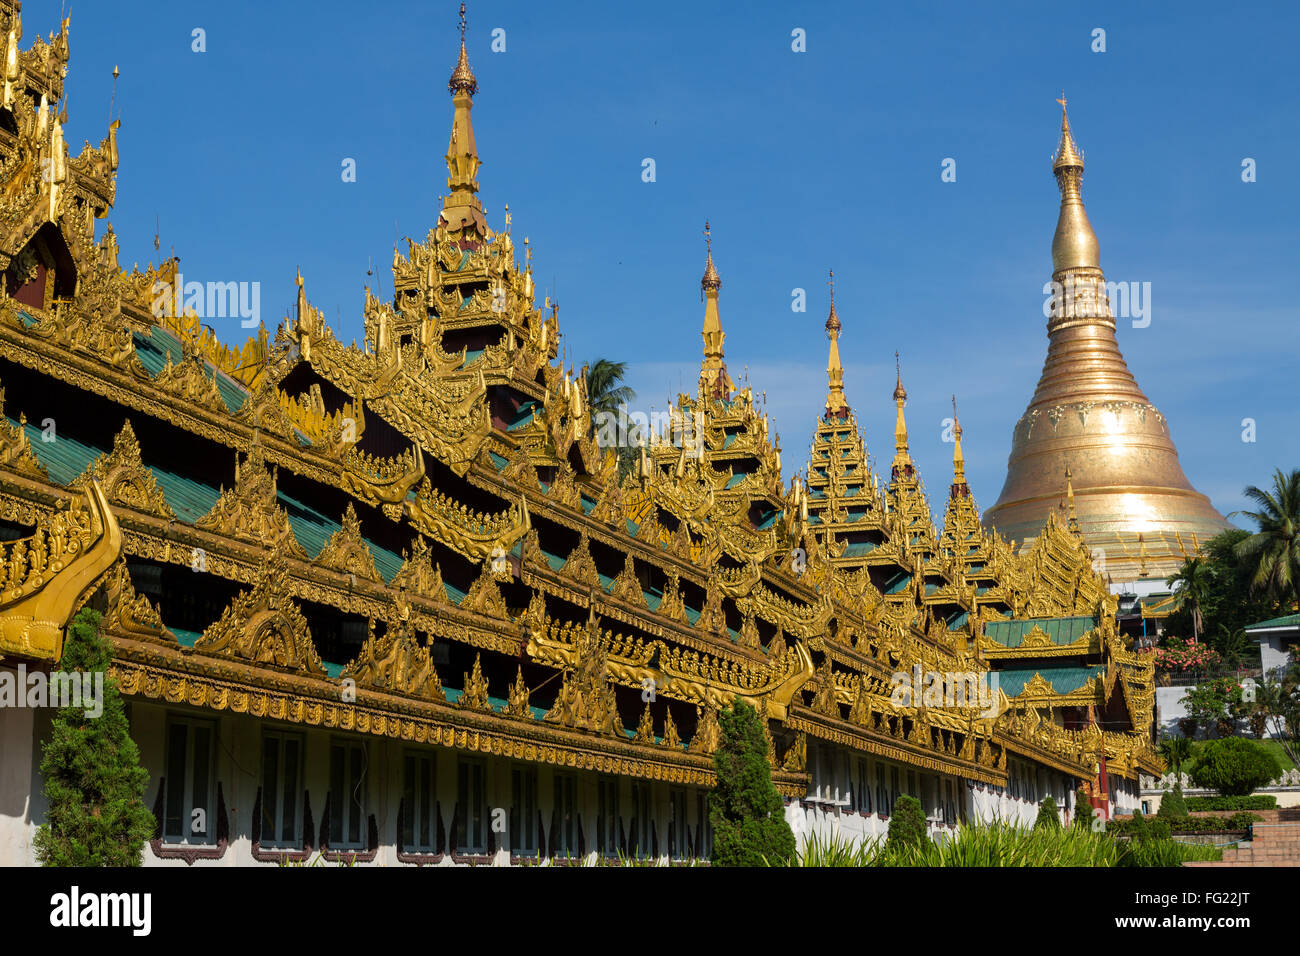 The Shwedagon pagoda showing the highly decorated covered approach - landscape Stock Photo